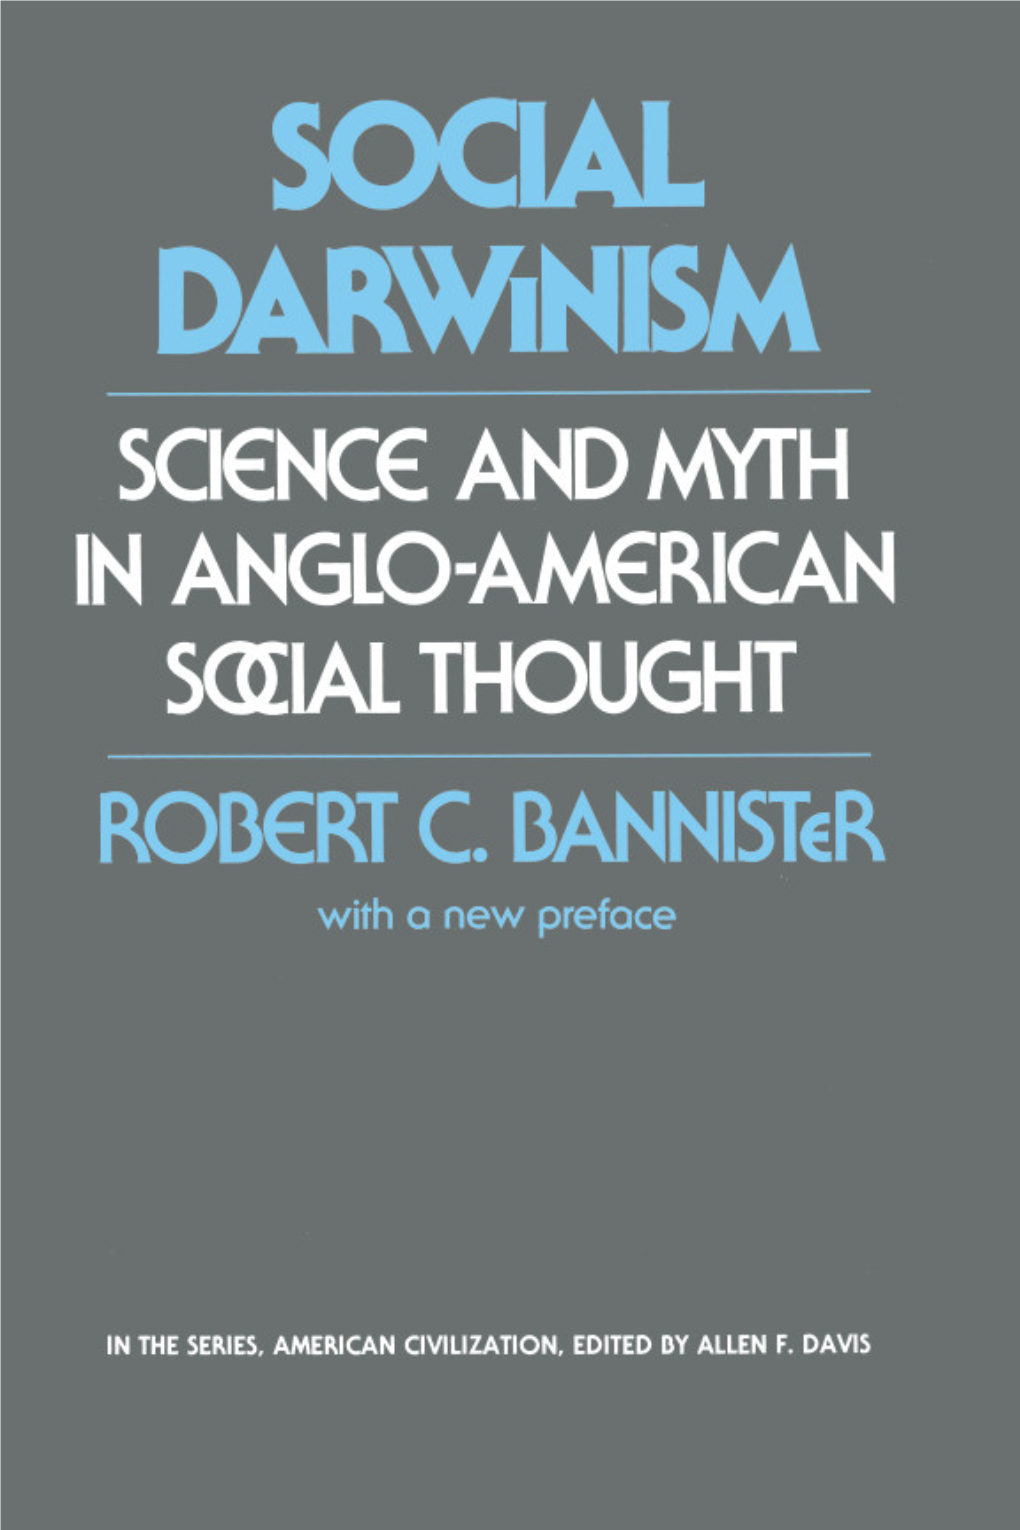 Social Darwinism Science and Myth in Anglo-American Social Thought